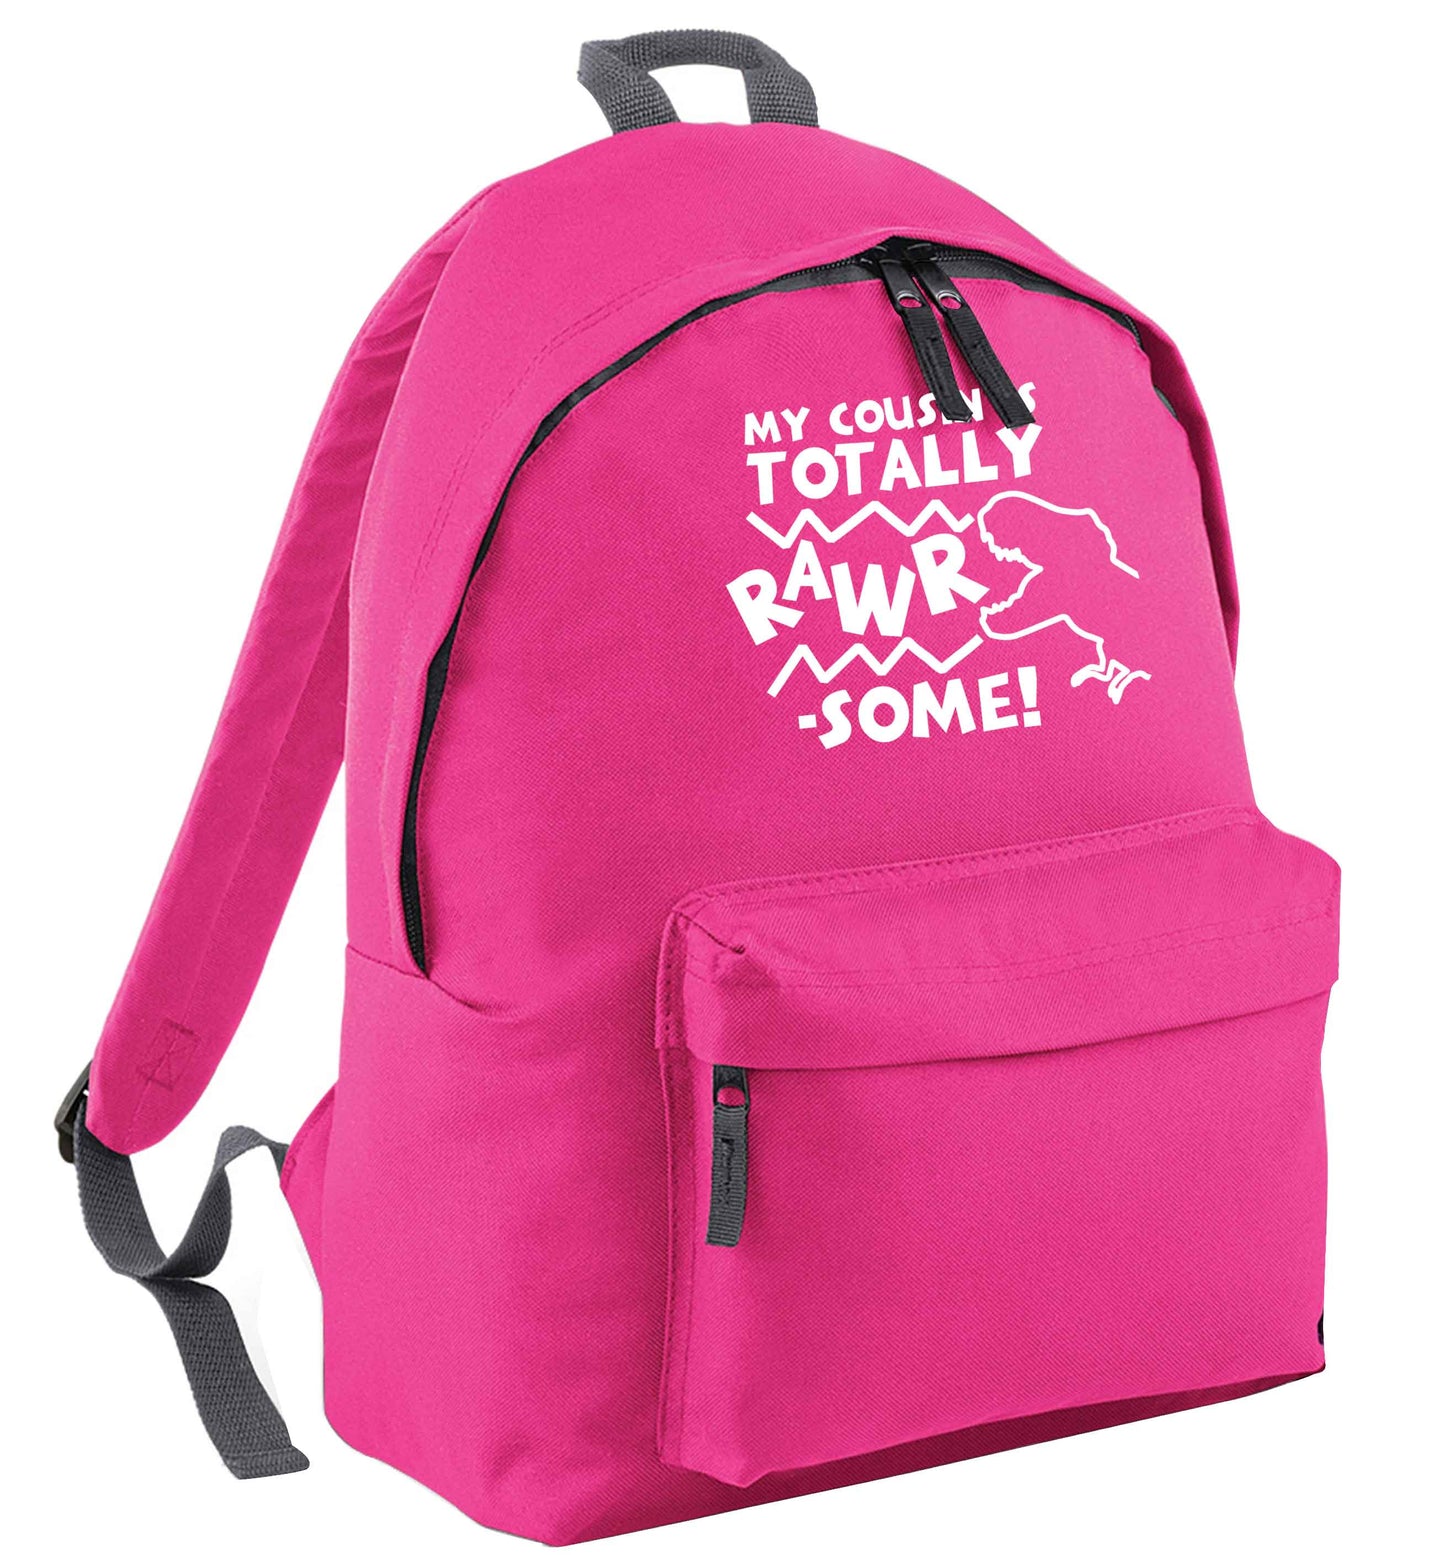 My cousin is totally rawrsome pink adults backpack